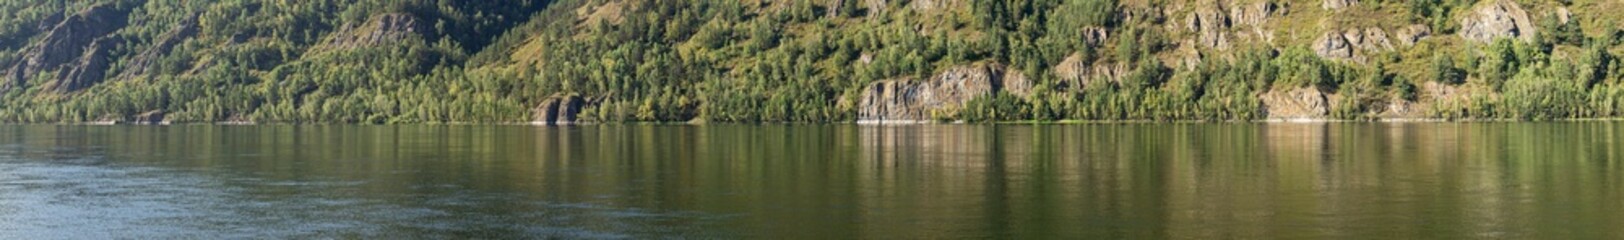 A wide panorama of the rocky bank of a large river.